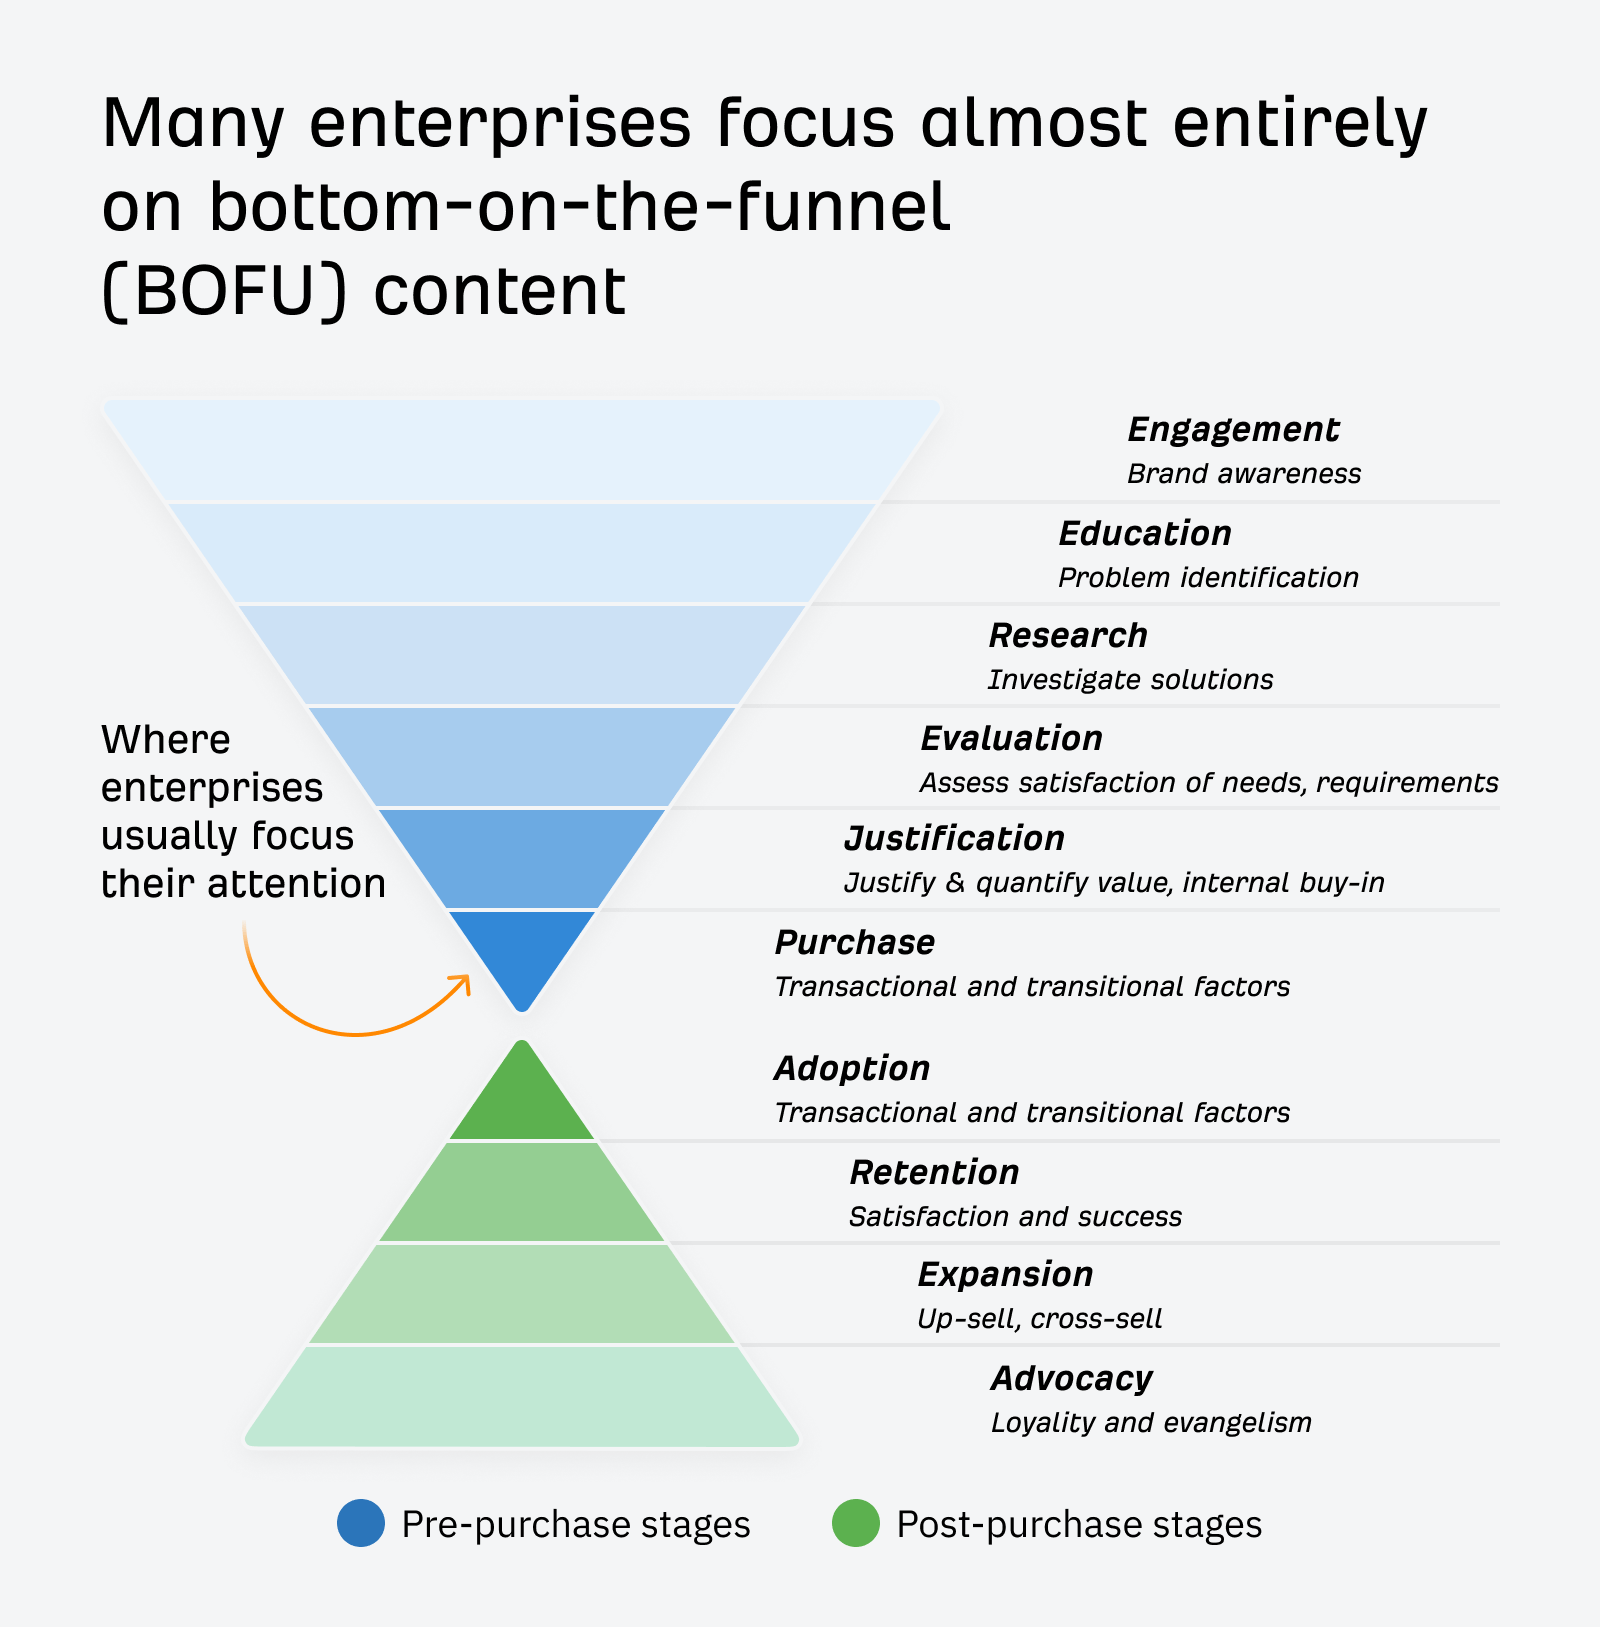 Enterprise companies focus on bottom of the funnel content